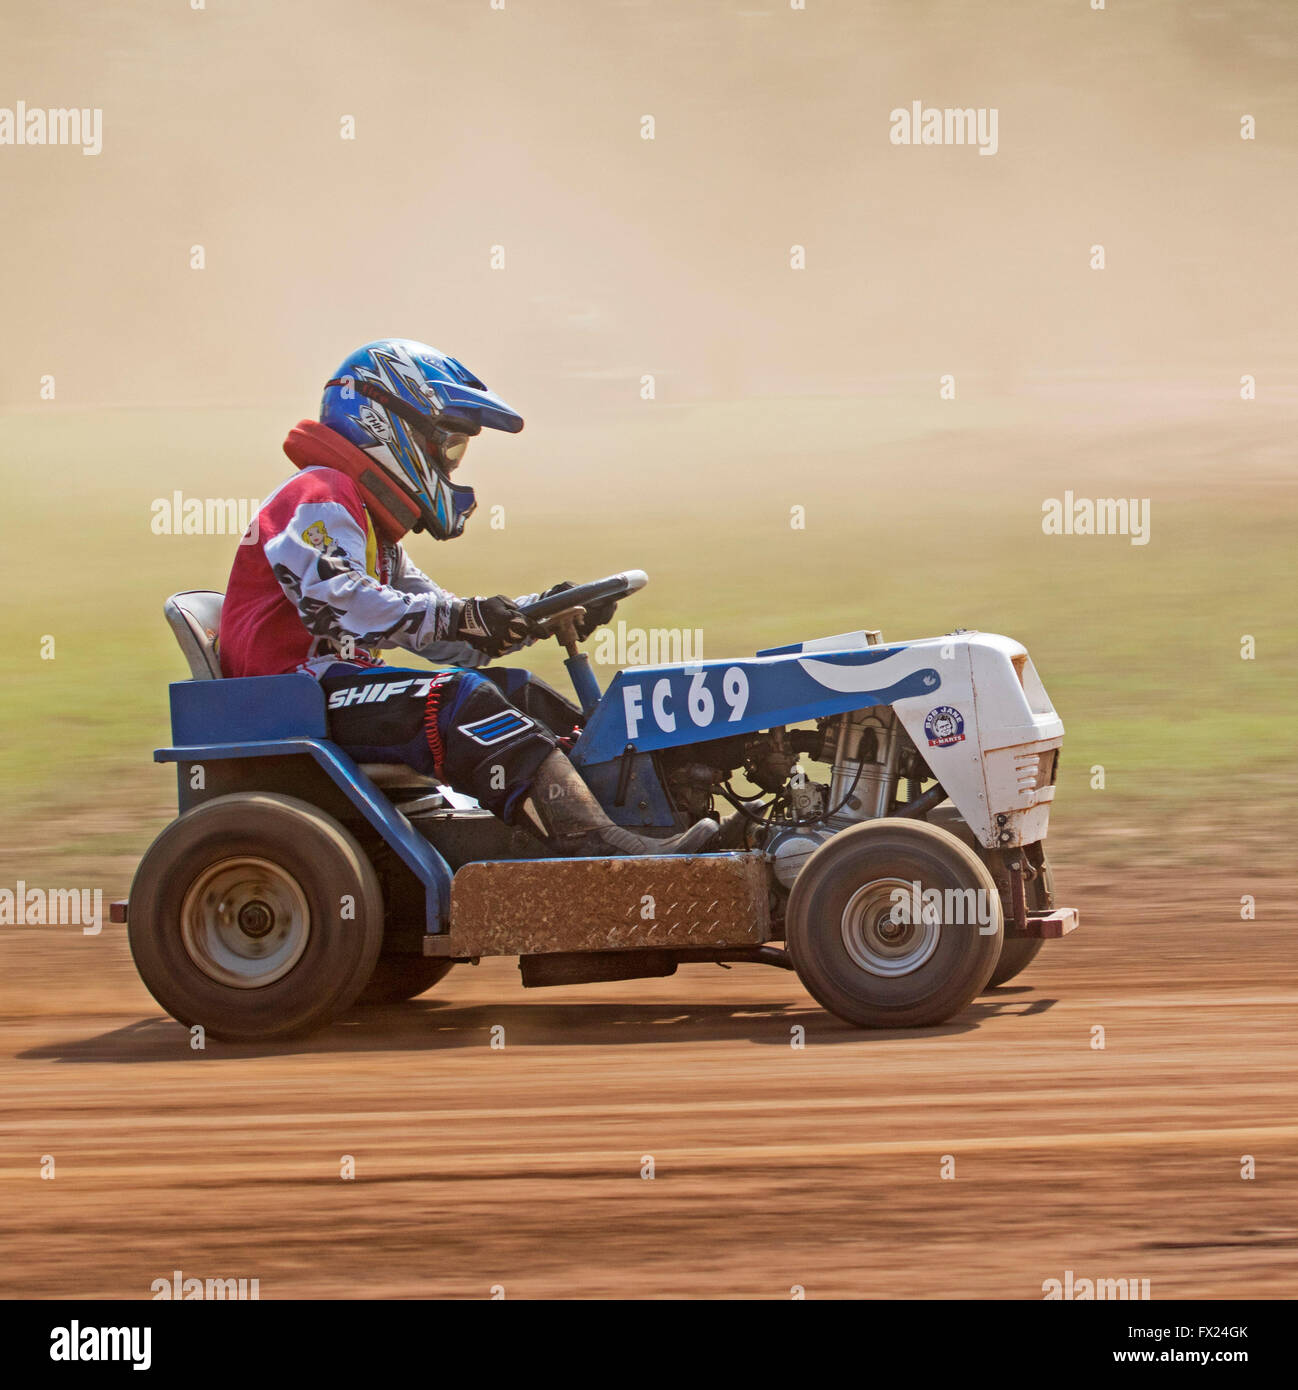 Man with colourful clothing & helmet driving blue motor mower on dusty track in unusual Australian motor racing sport Stock Photo